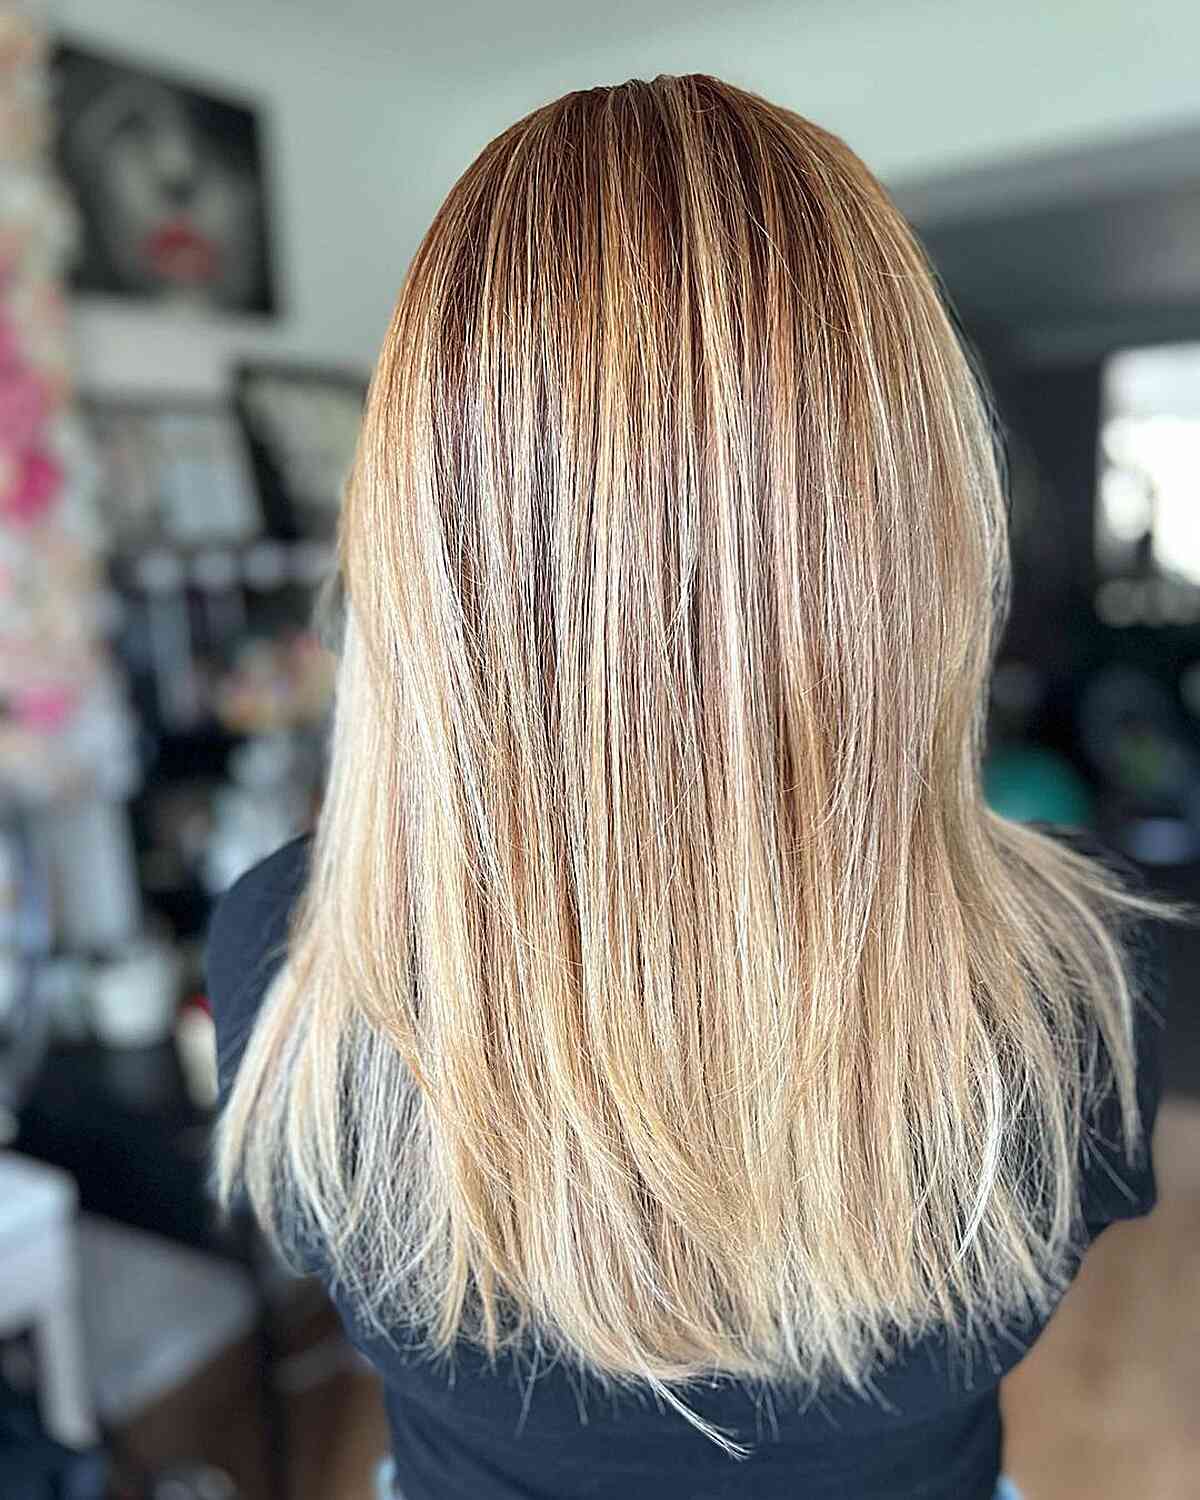 Medium-Long Buttery Blonde Straight Balayage Hair with Copper Roots